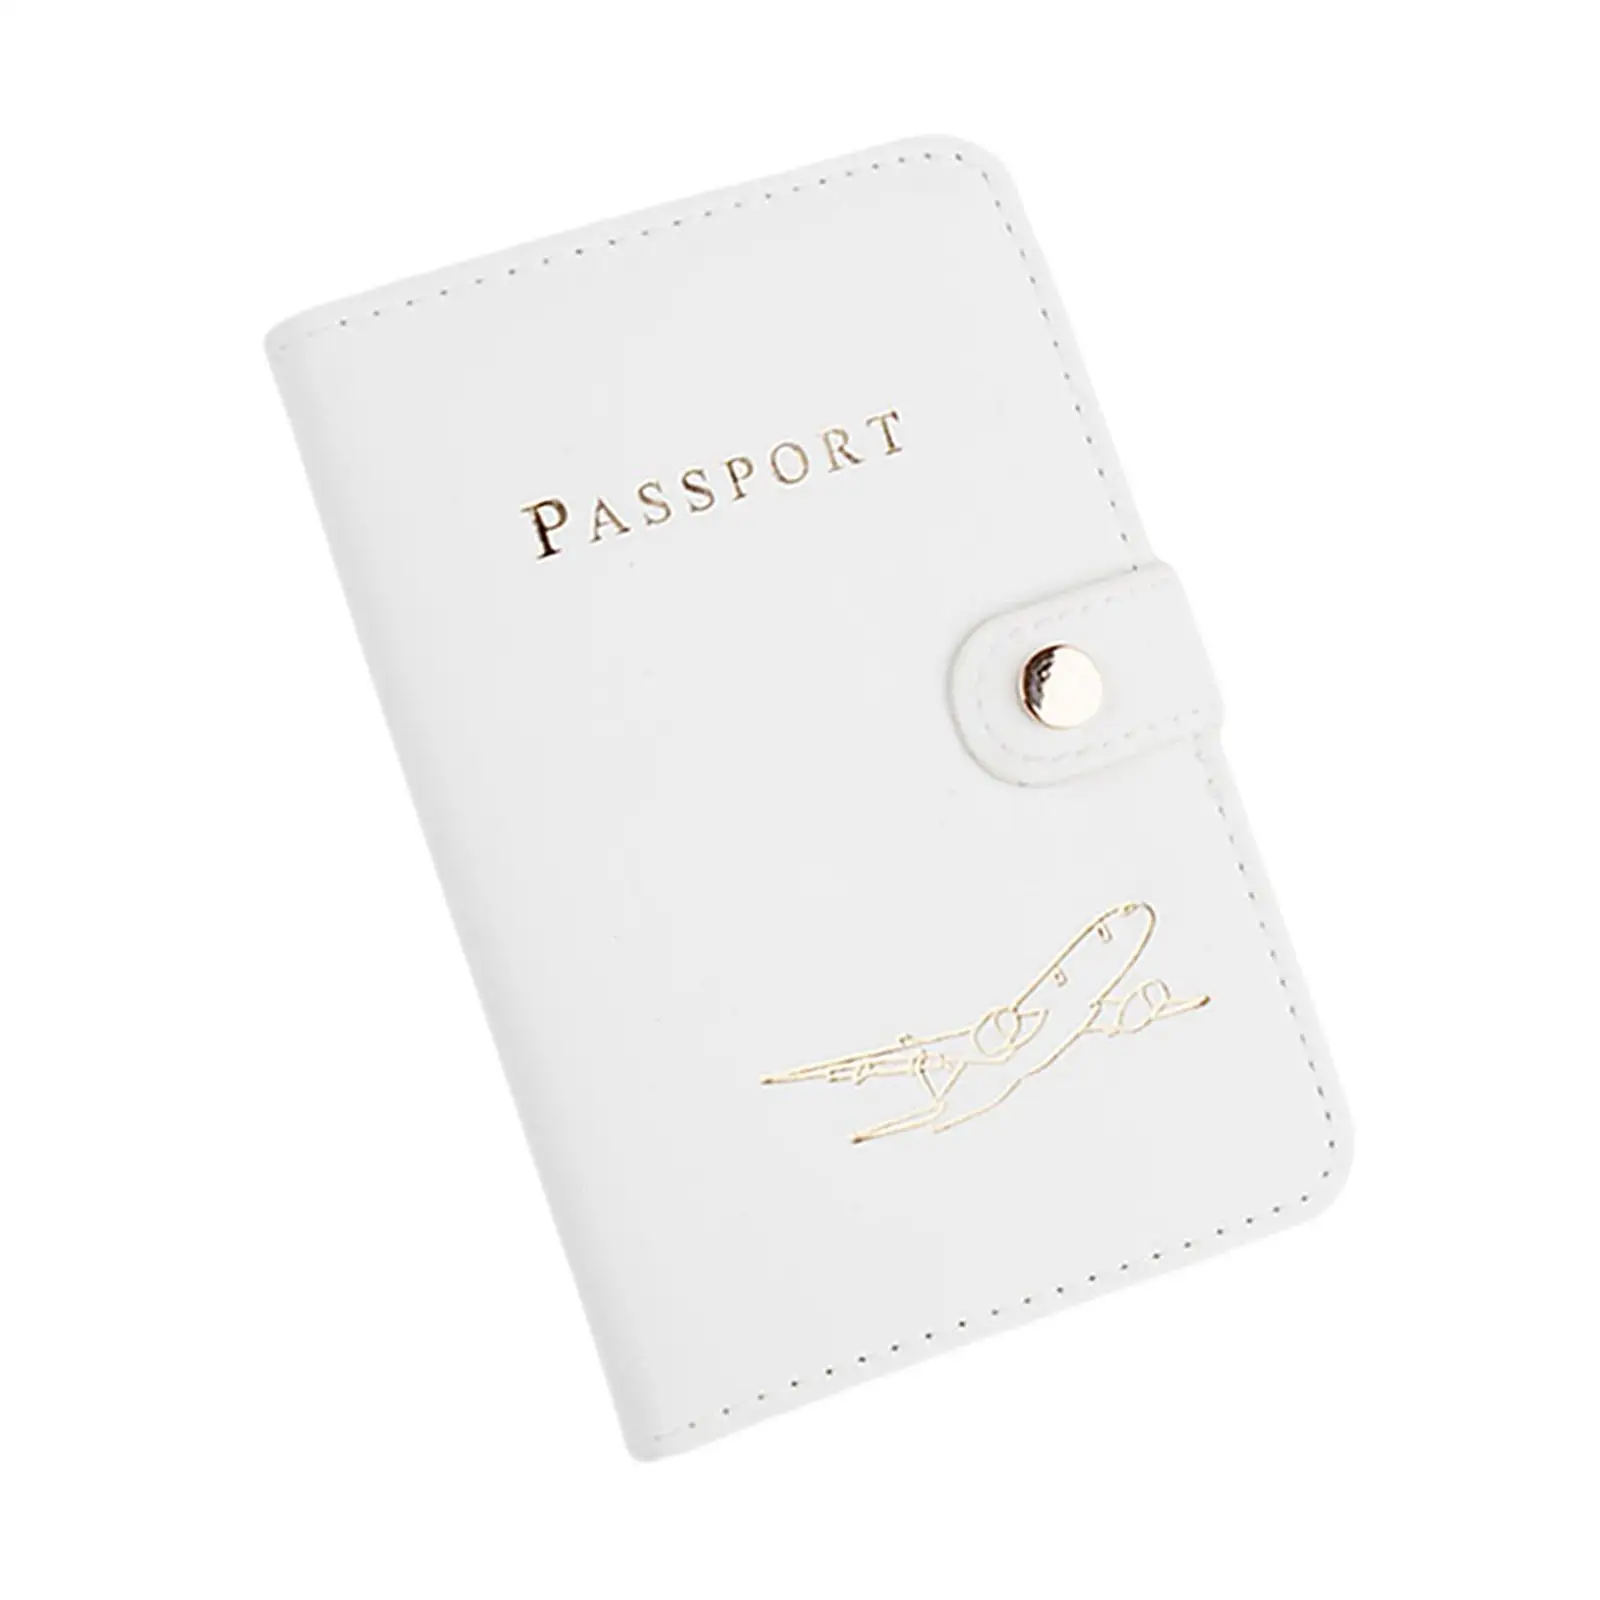 Passport Cover Holder Card Protector Fashionable Good Quality 14.5x10x1cm Travel Gift PU Leather Card Holder for Family Vacation